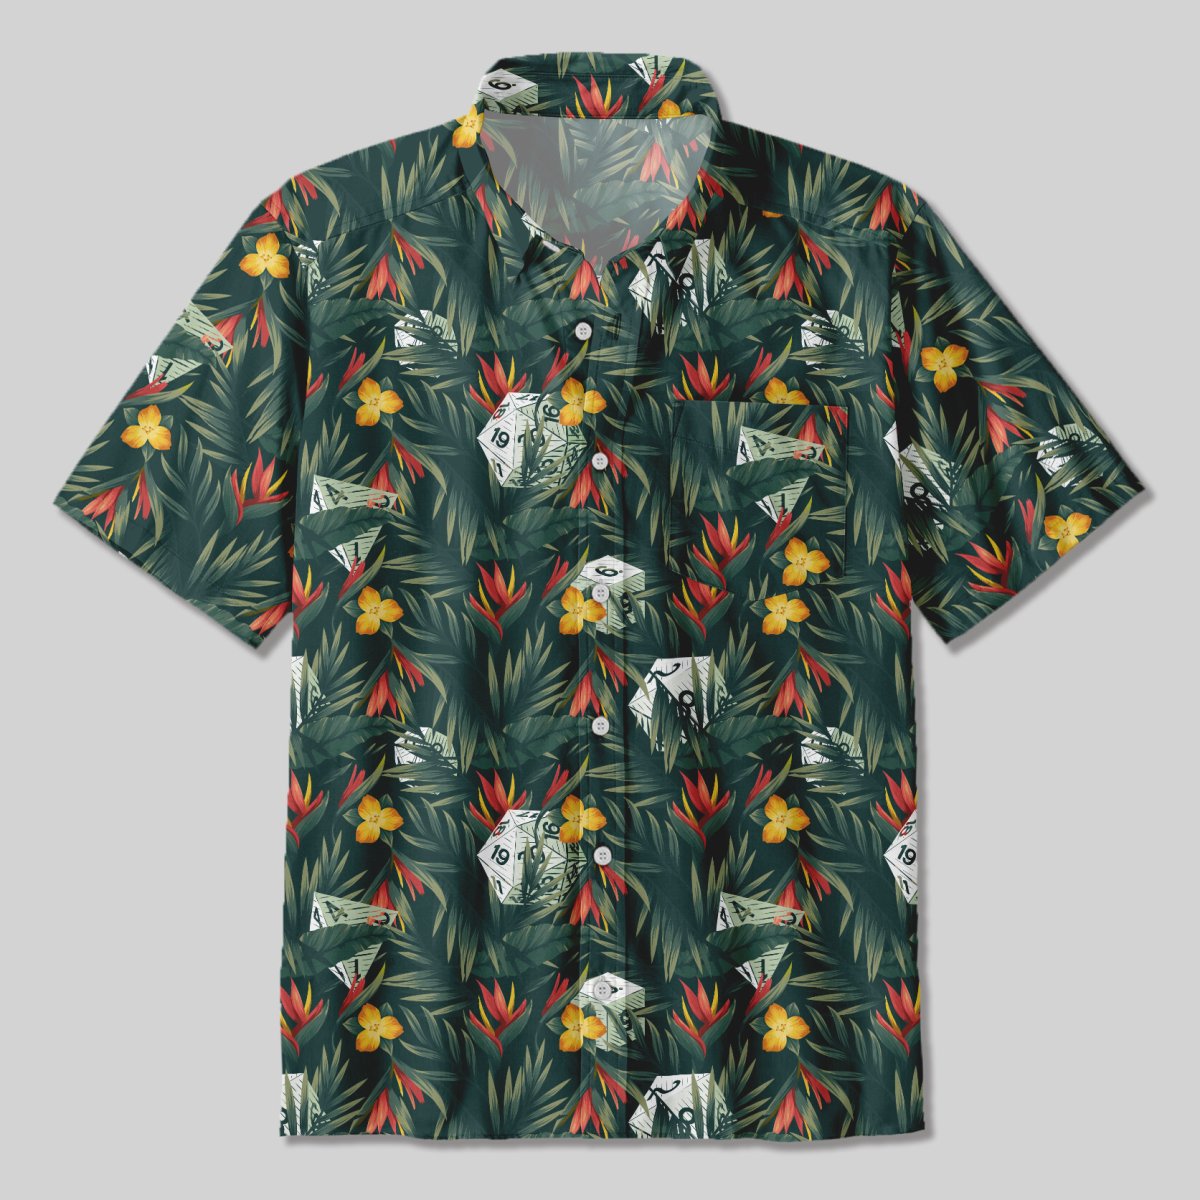 DND Multi Sided Dice in The Flower Cluster Button Up Pocket Shirt - Geeksoutfit